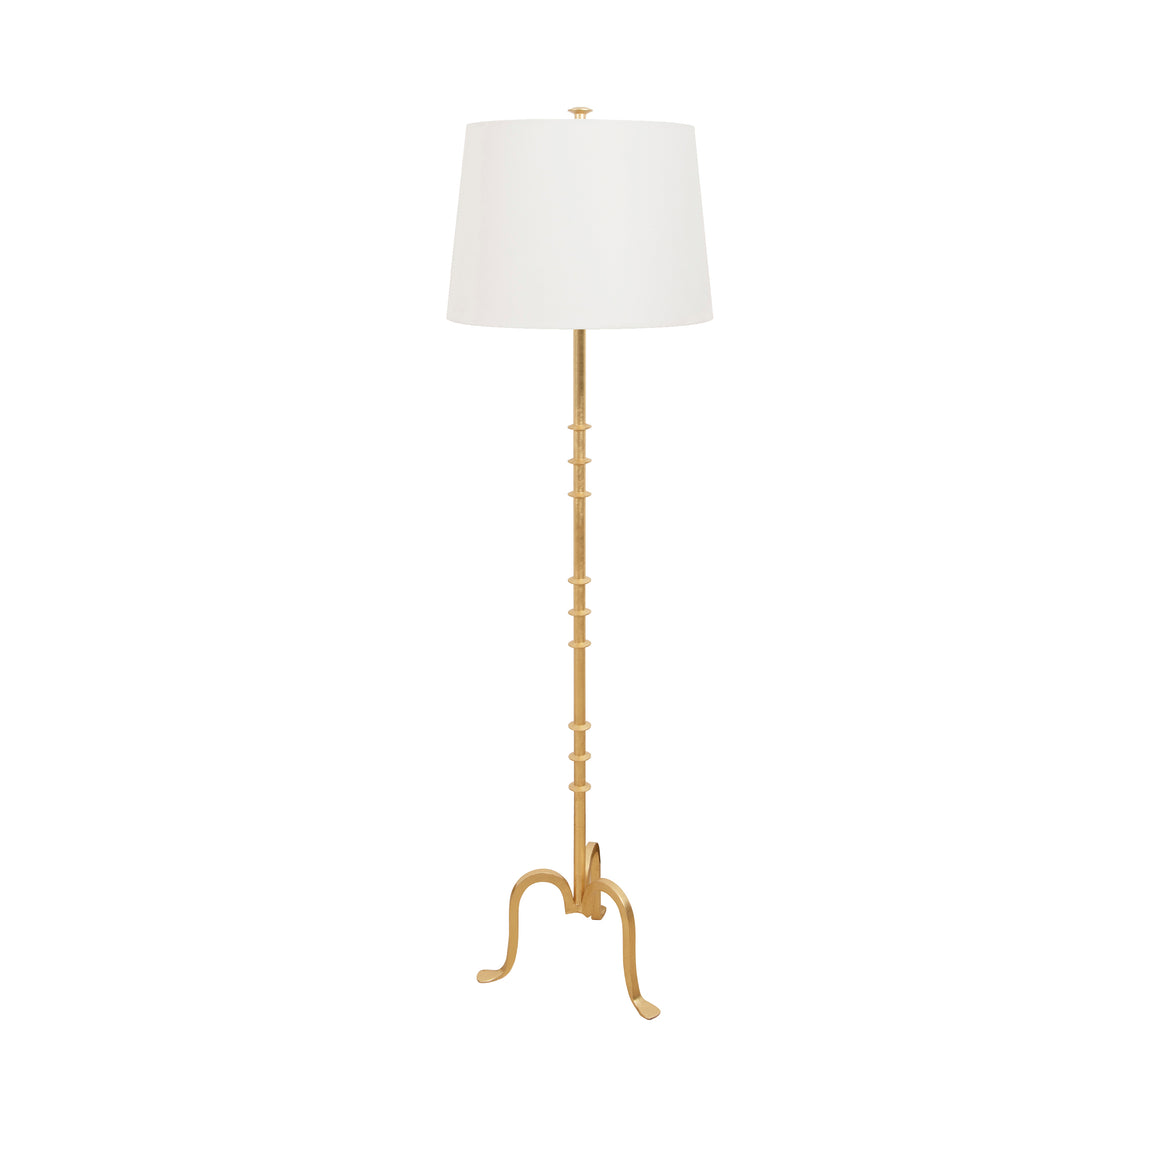 Three Leg Iron Floor Lamp with Ring Detail in Gold Leaf